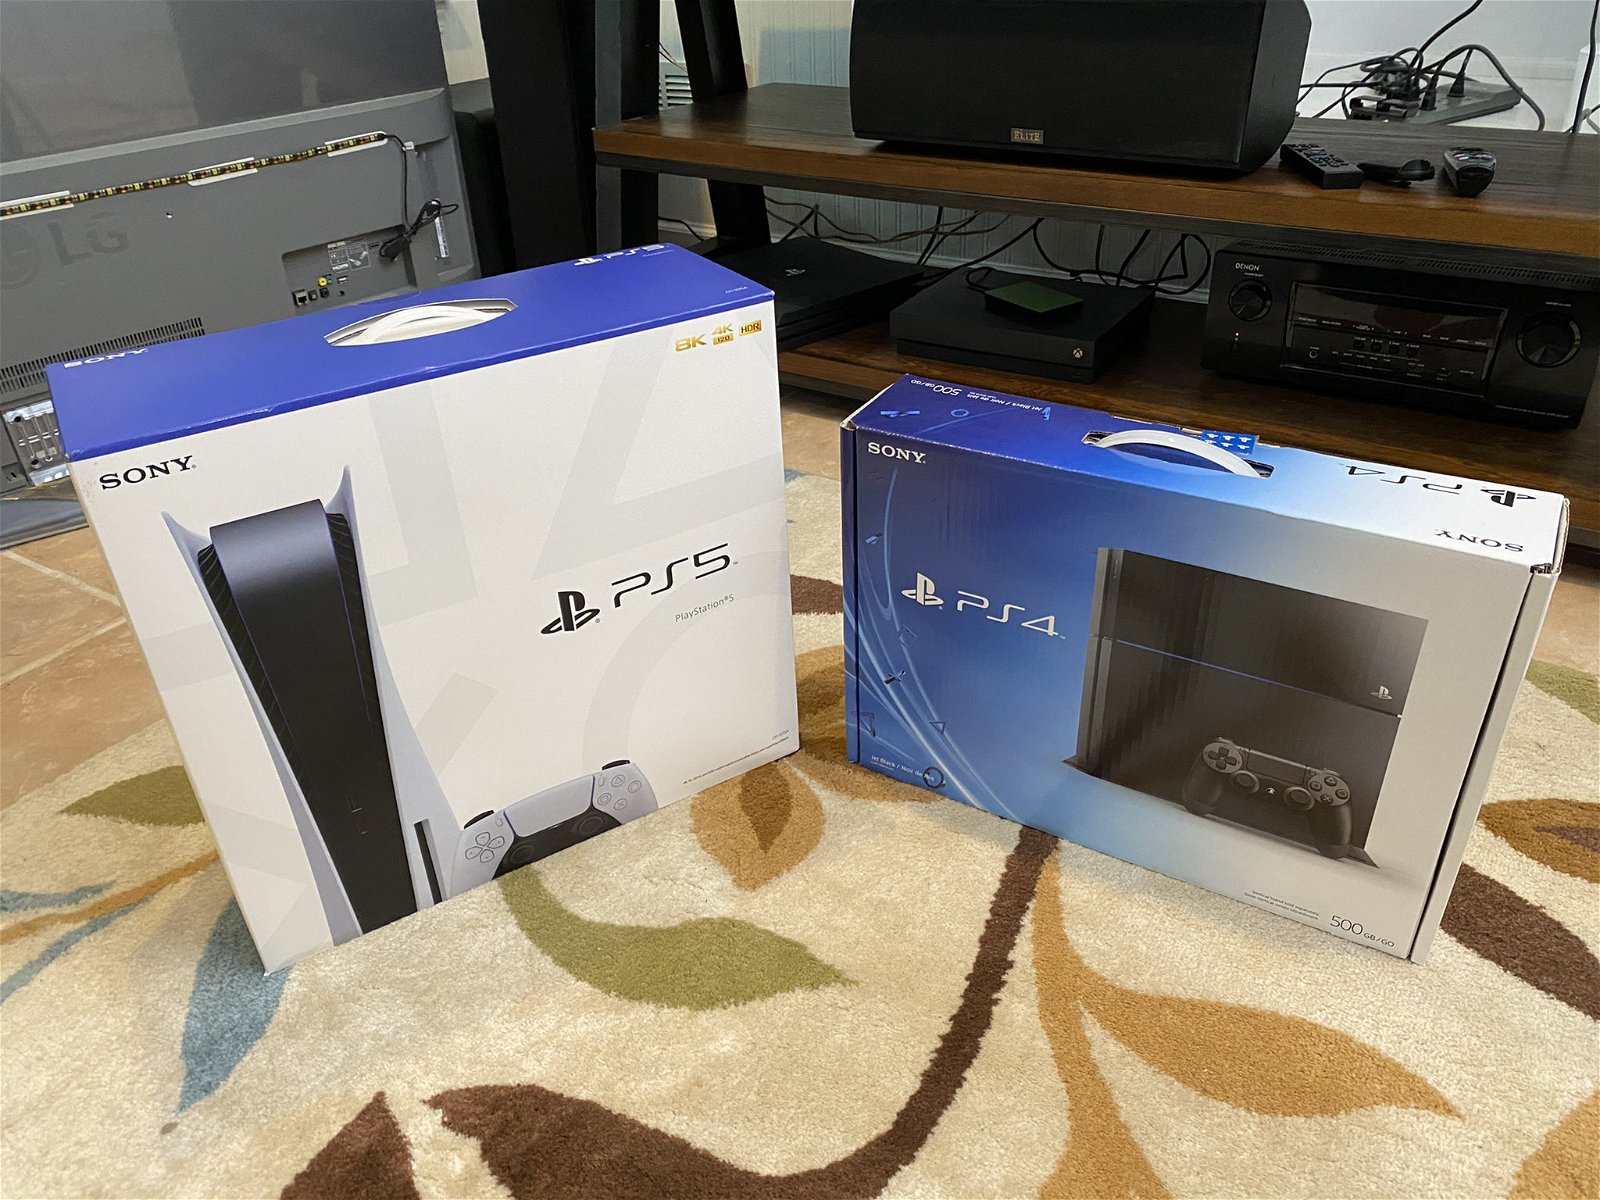 PlayStation 5 box Shown, PS4 to PS5 transfer method ...